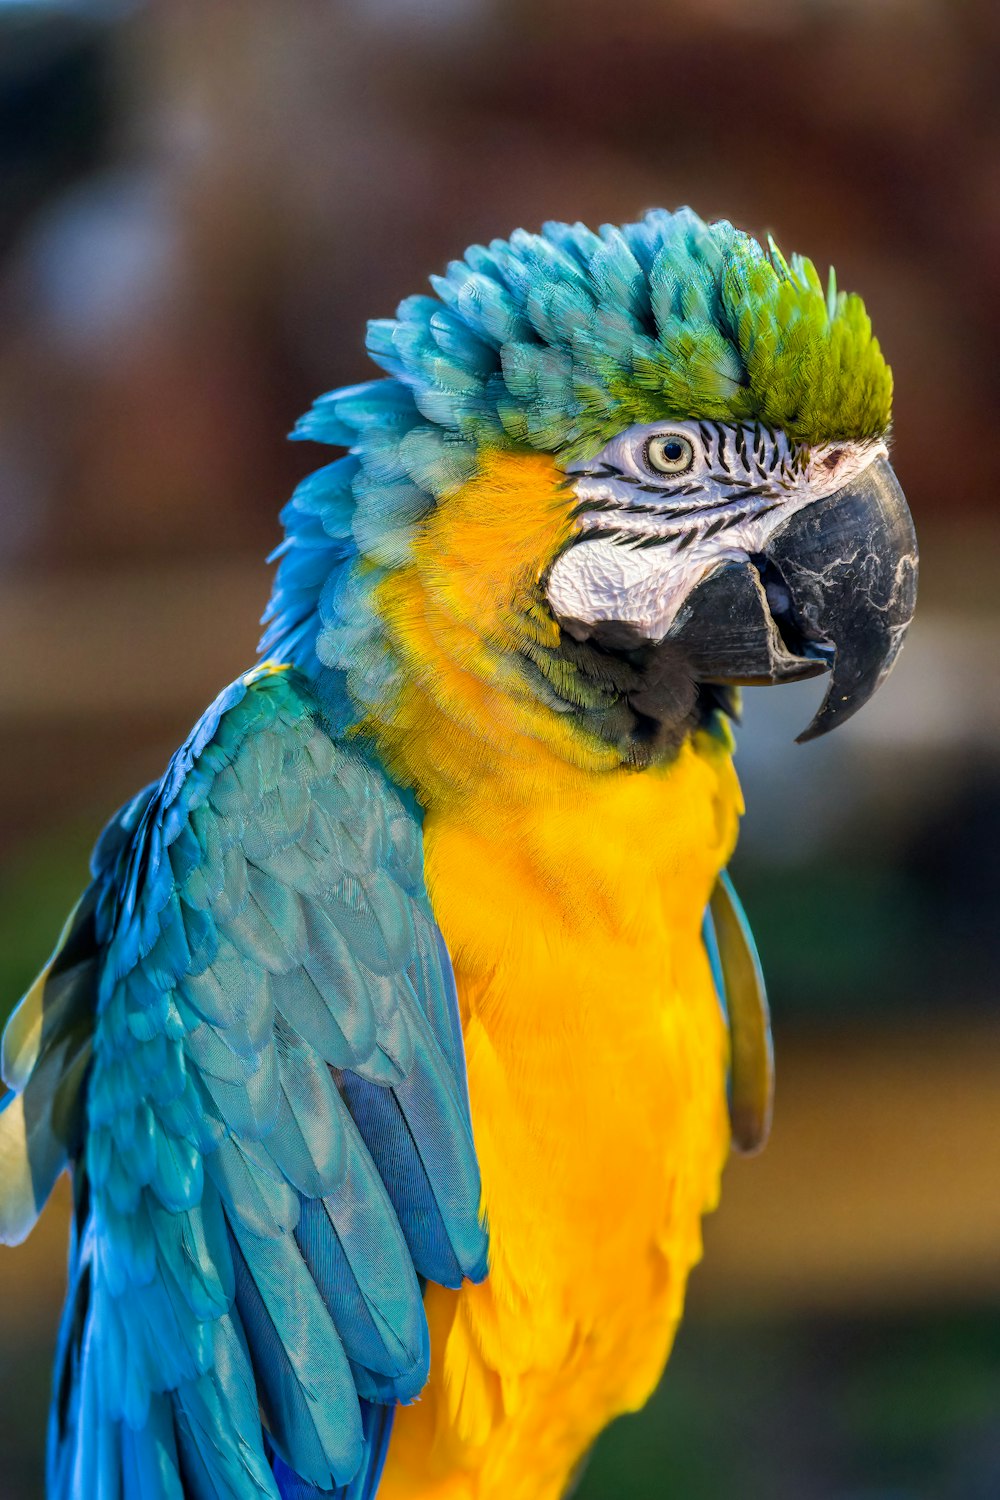 a blue and yellow parrot with green feathers